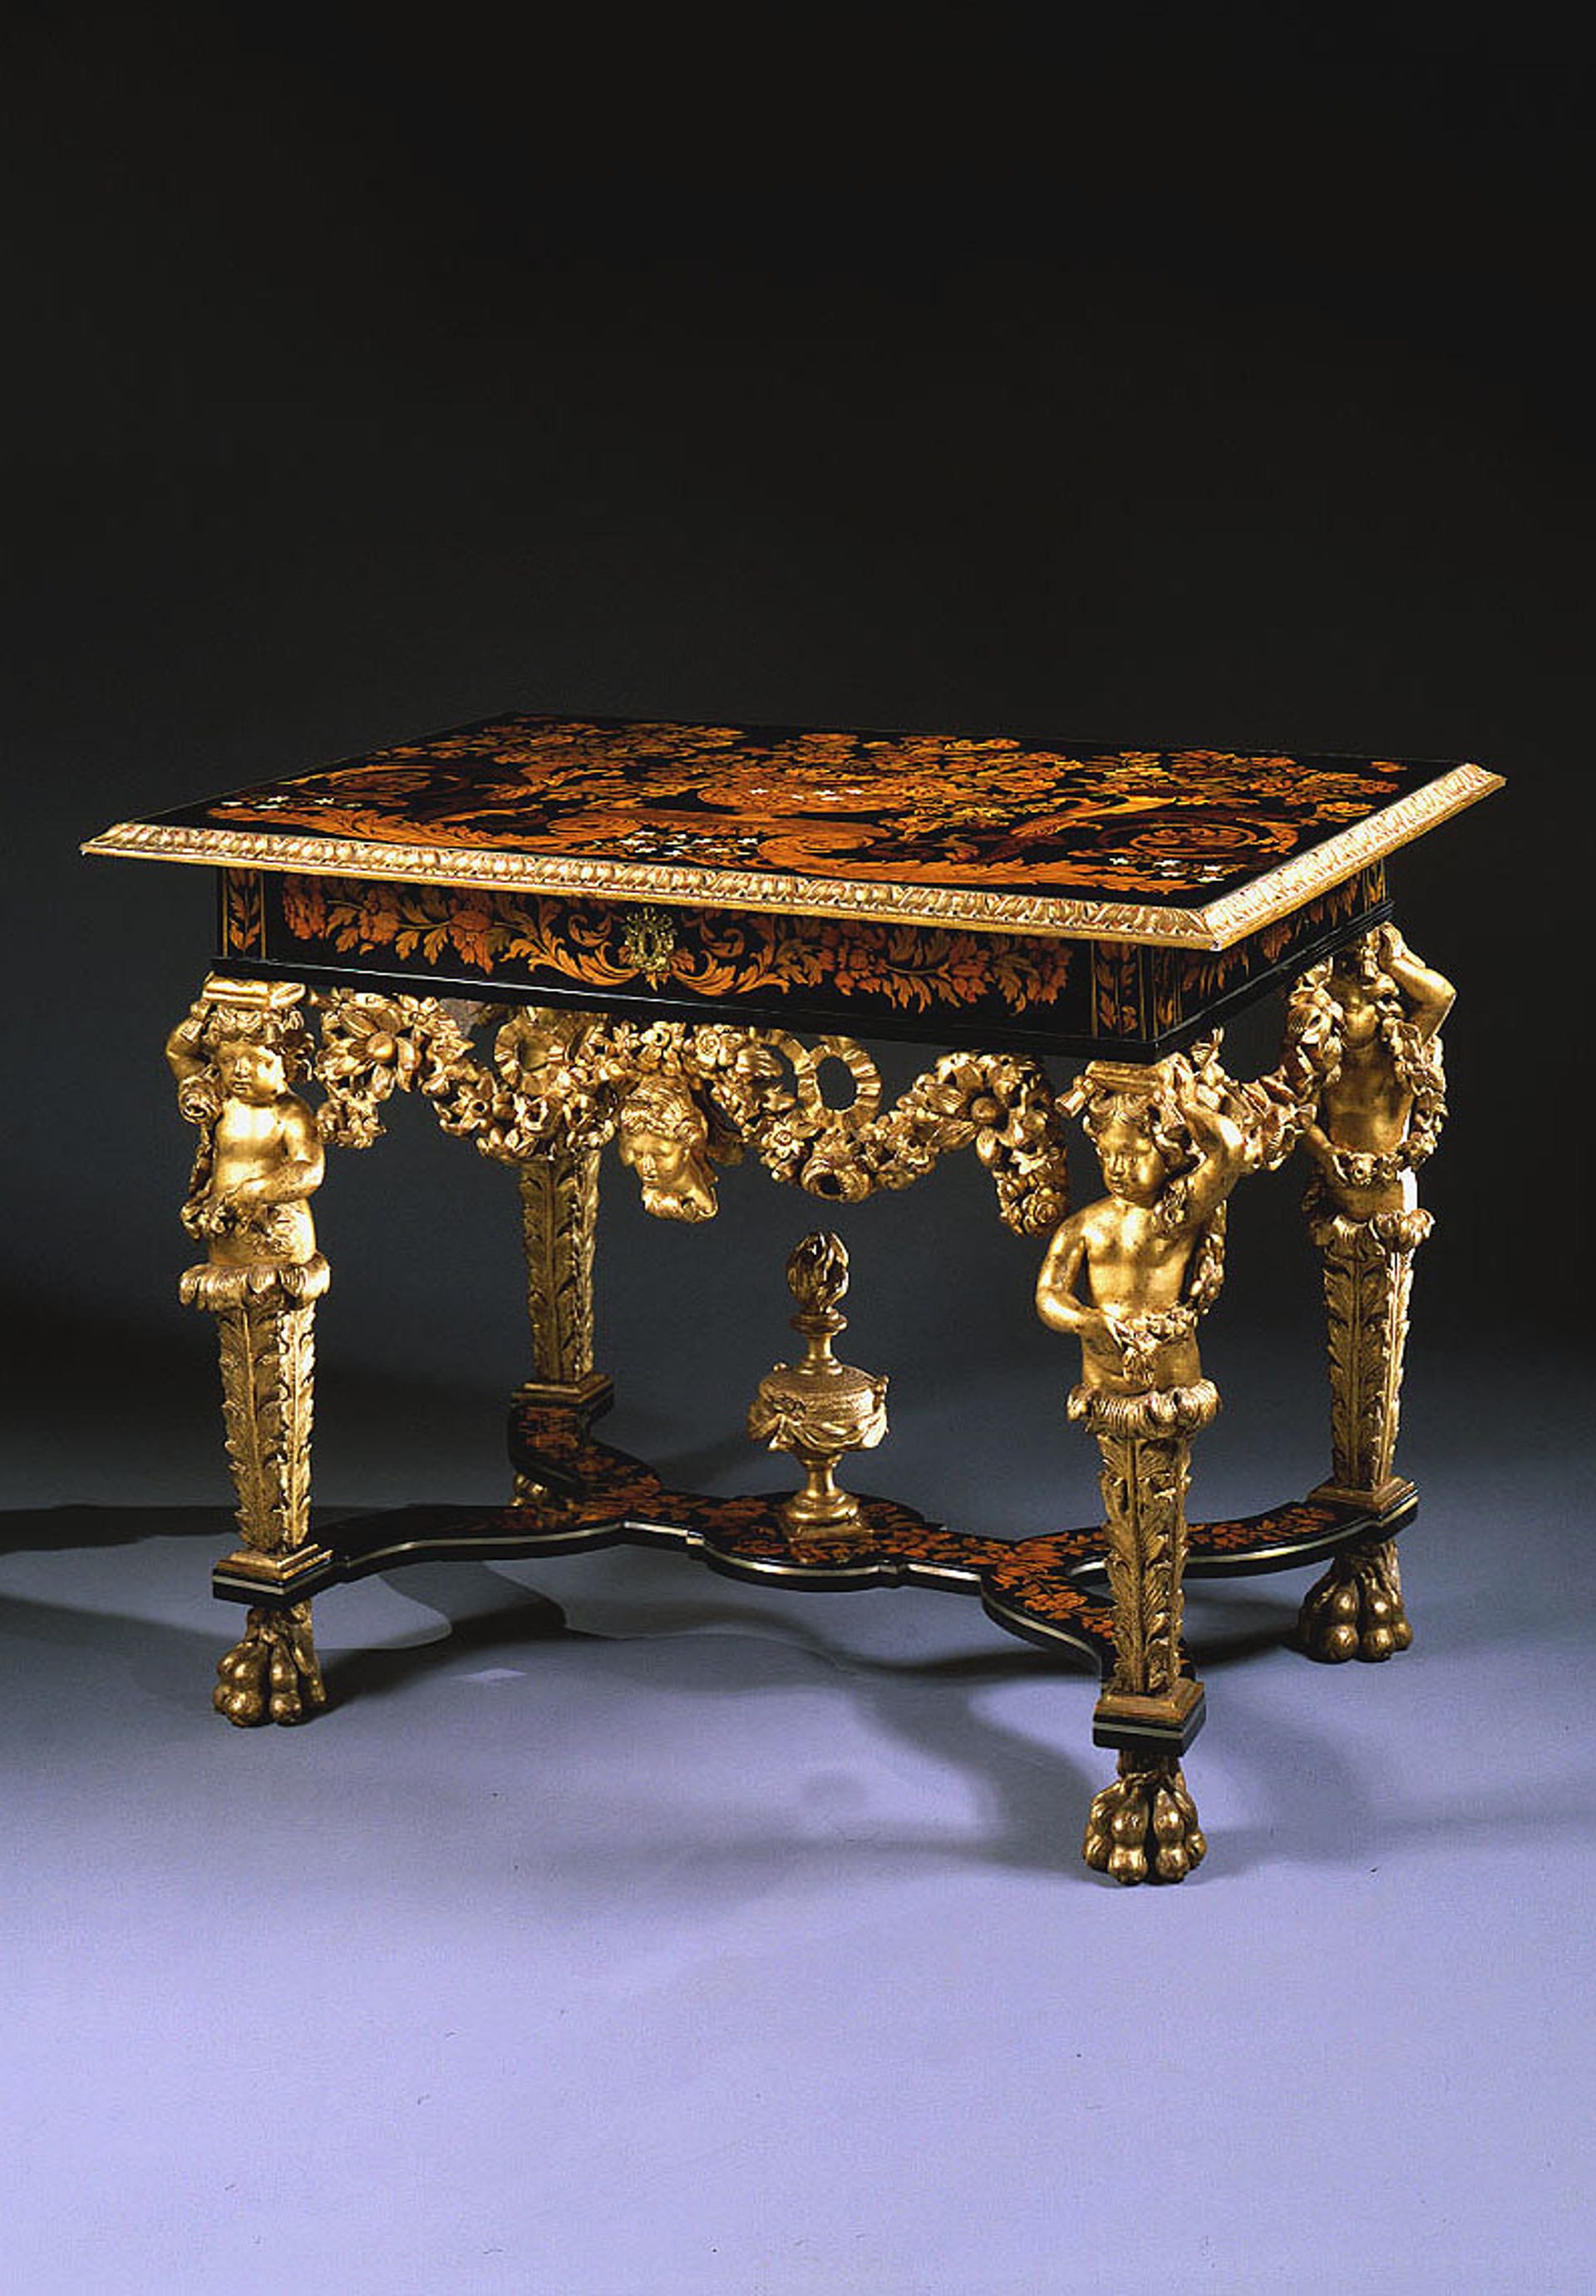 LOUIS XIV MARQUETRY TABLE